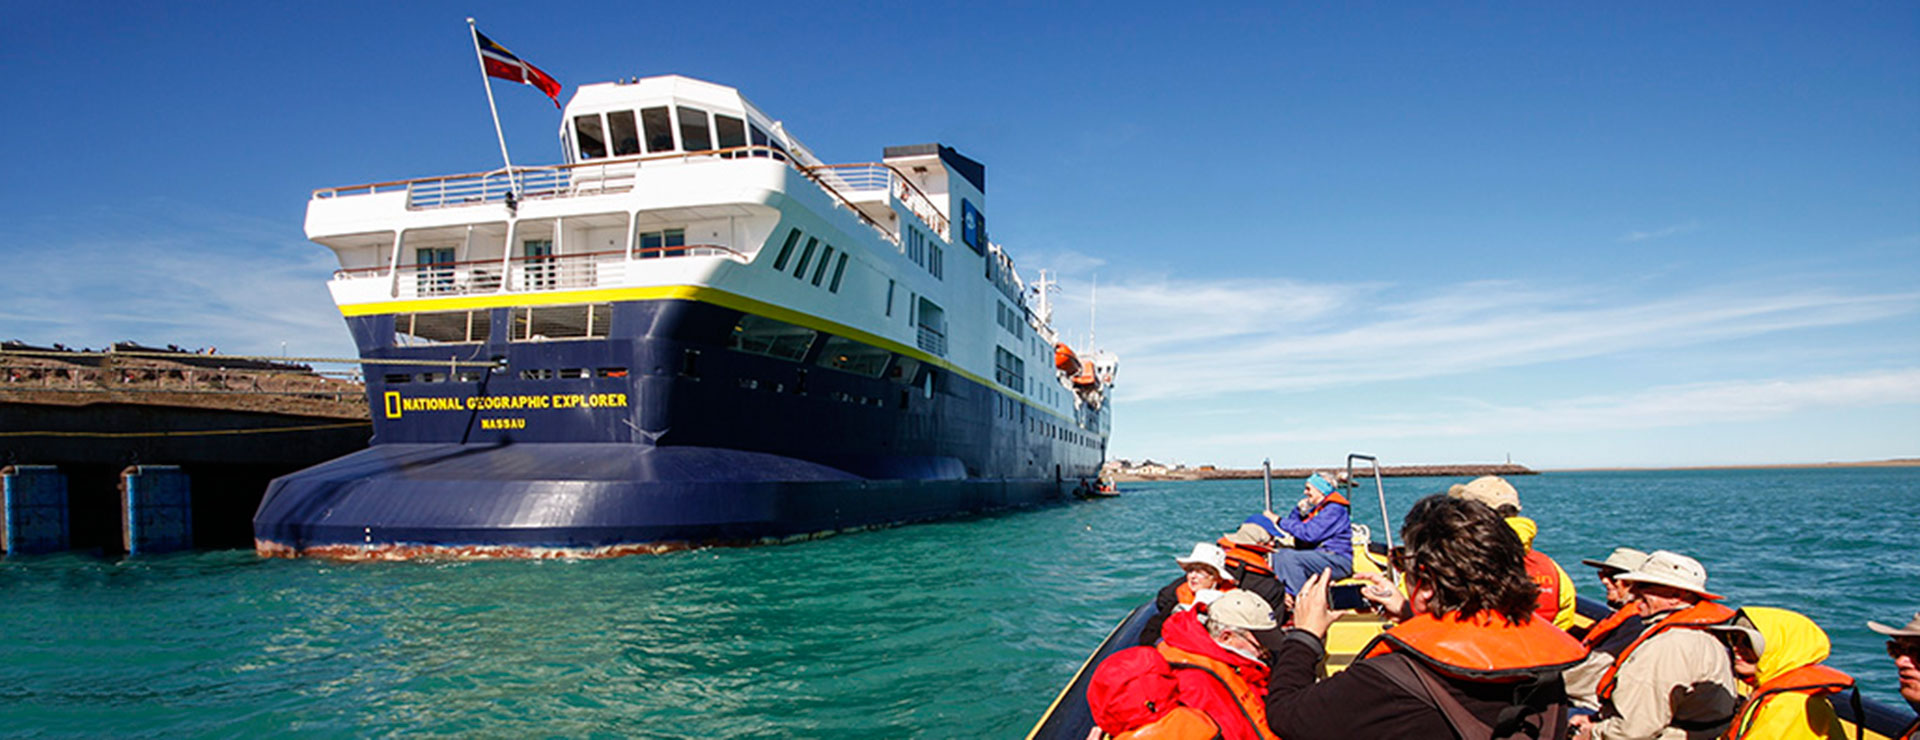 National Geographic Cruise